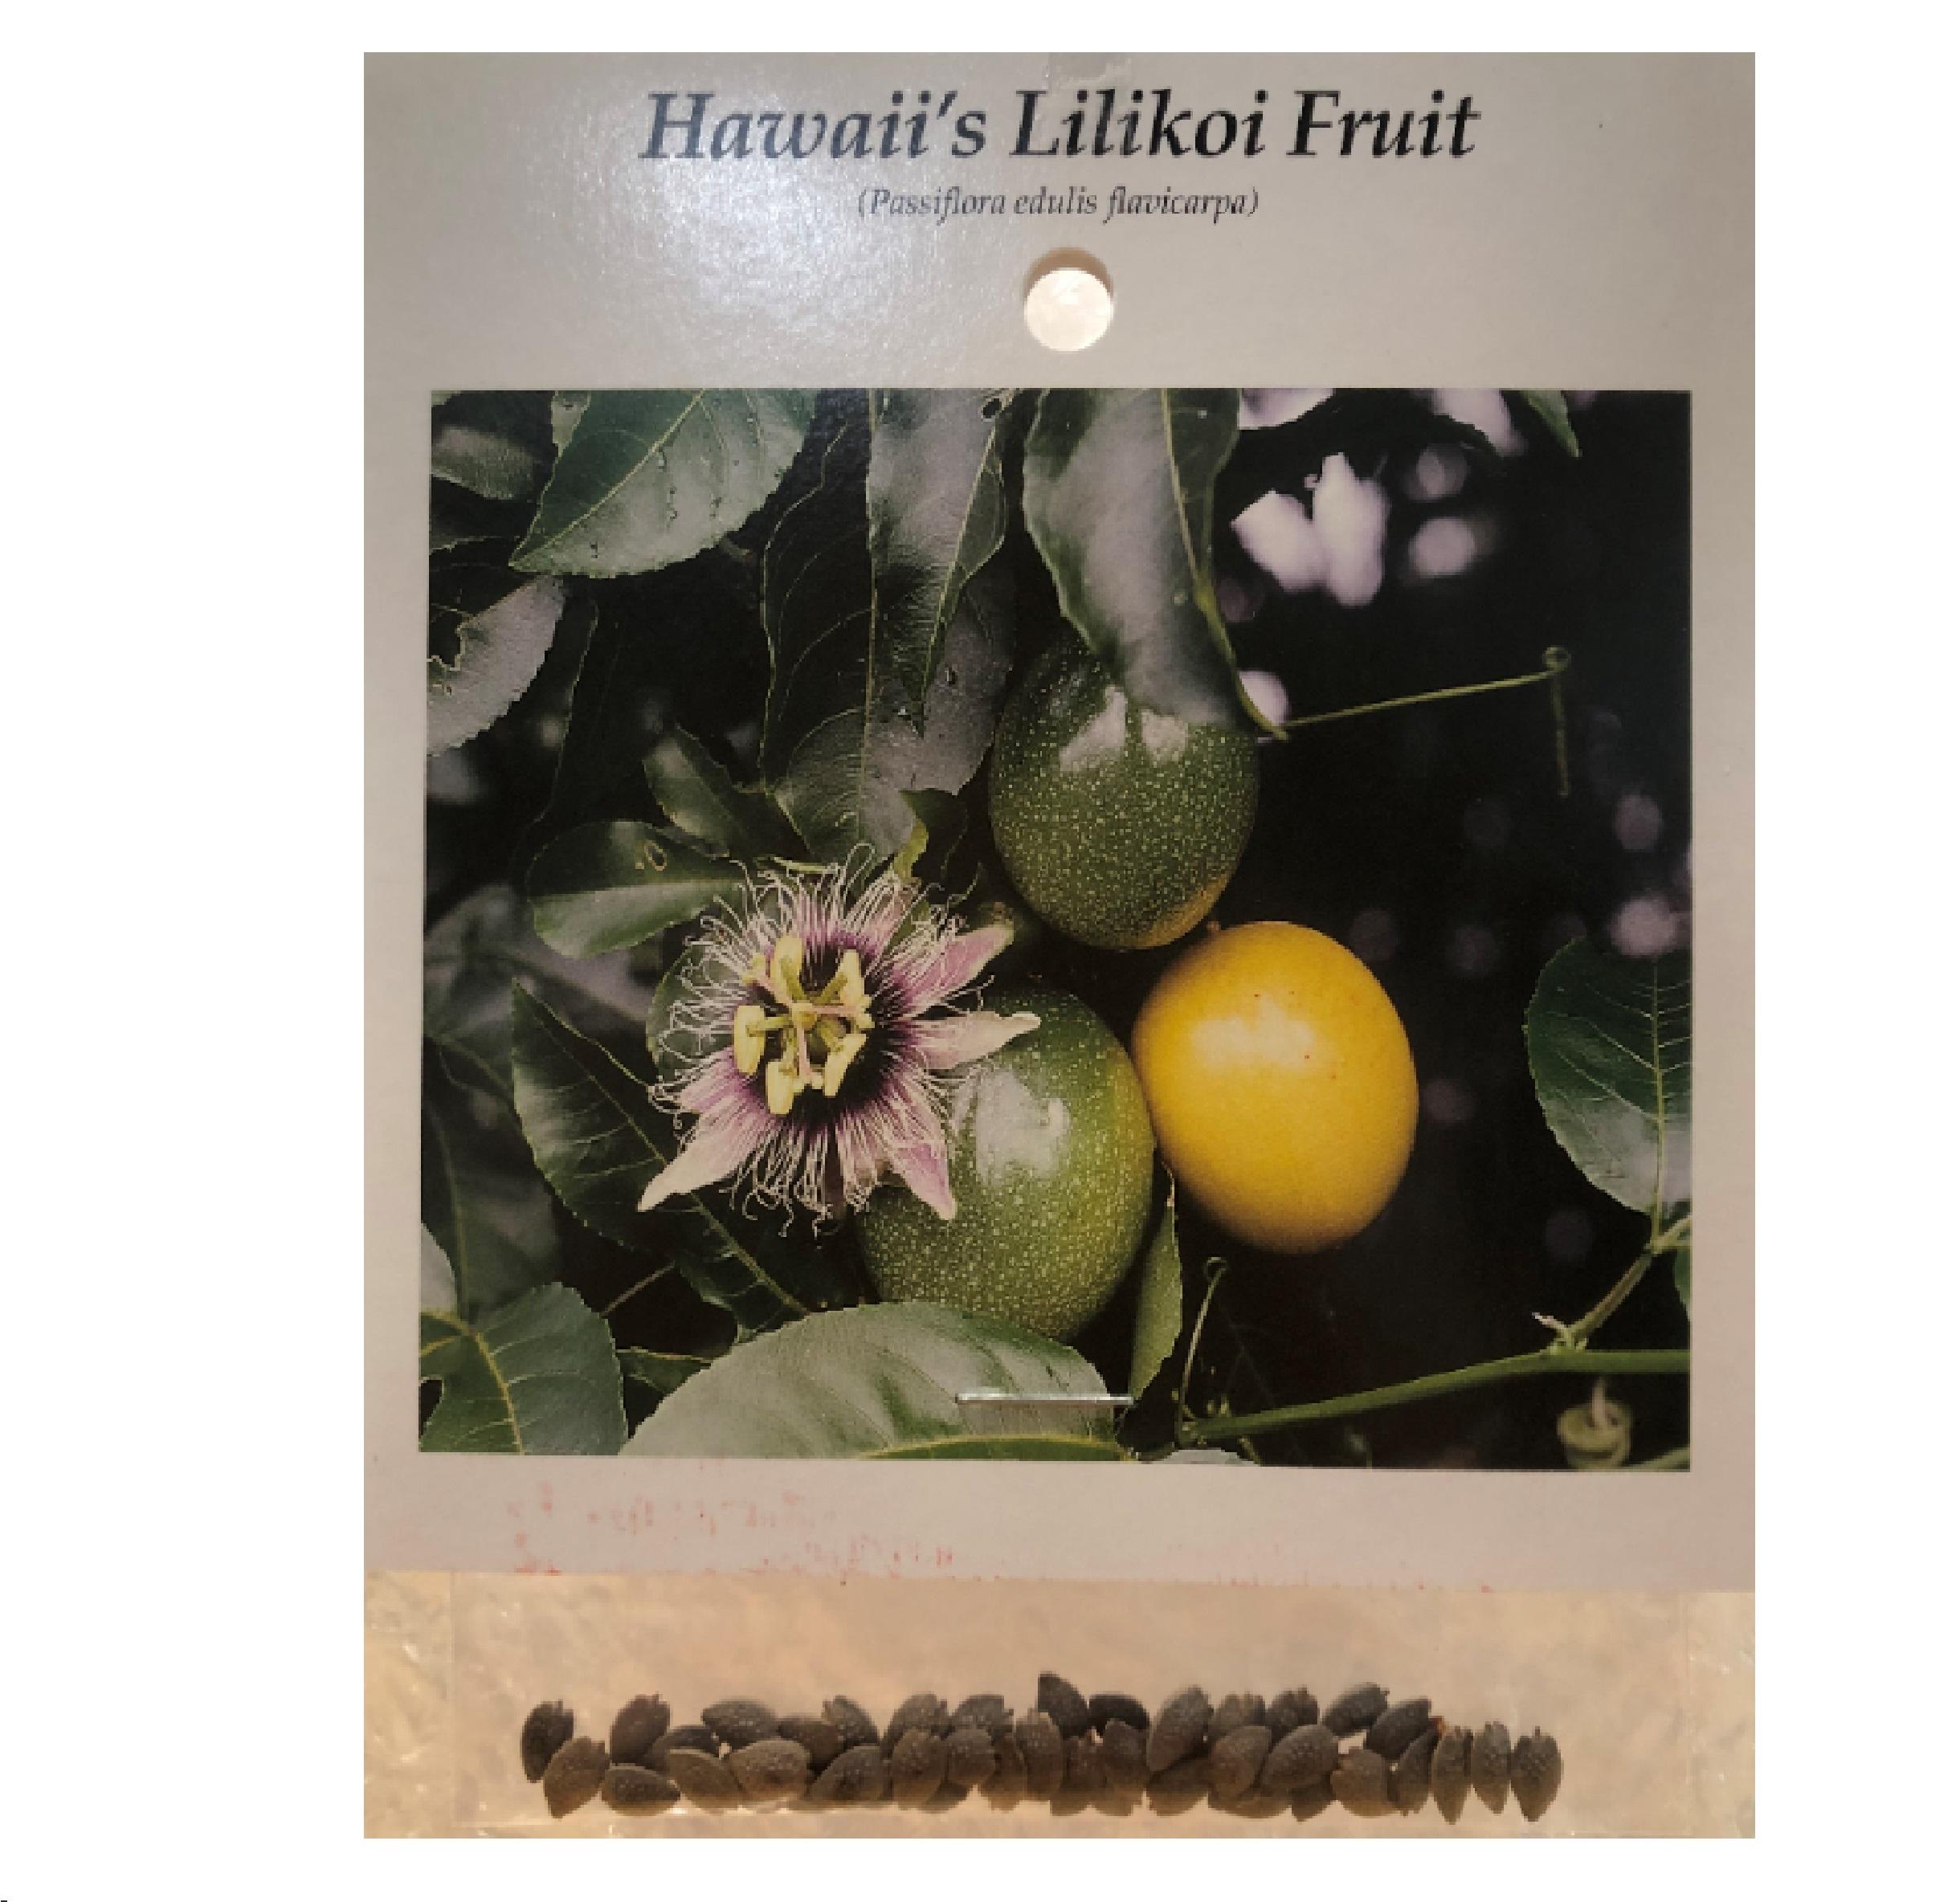 A Complete Guide To Hawaii's Passion Fruit: The Lilikoi